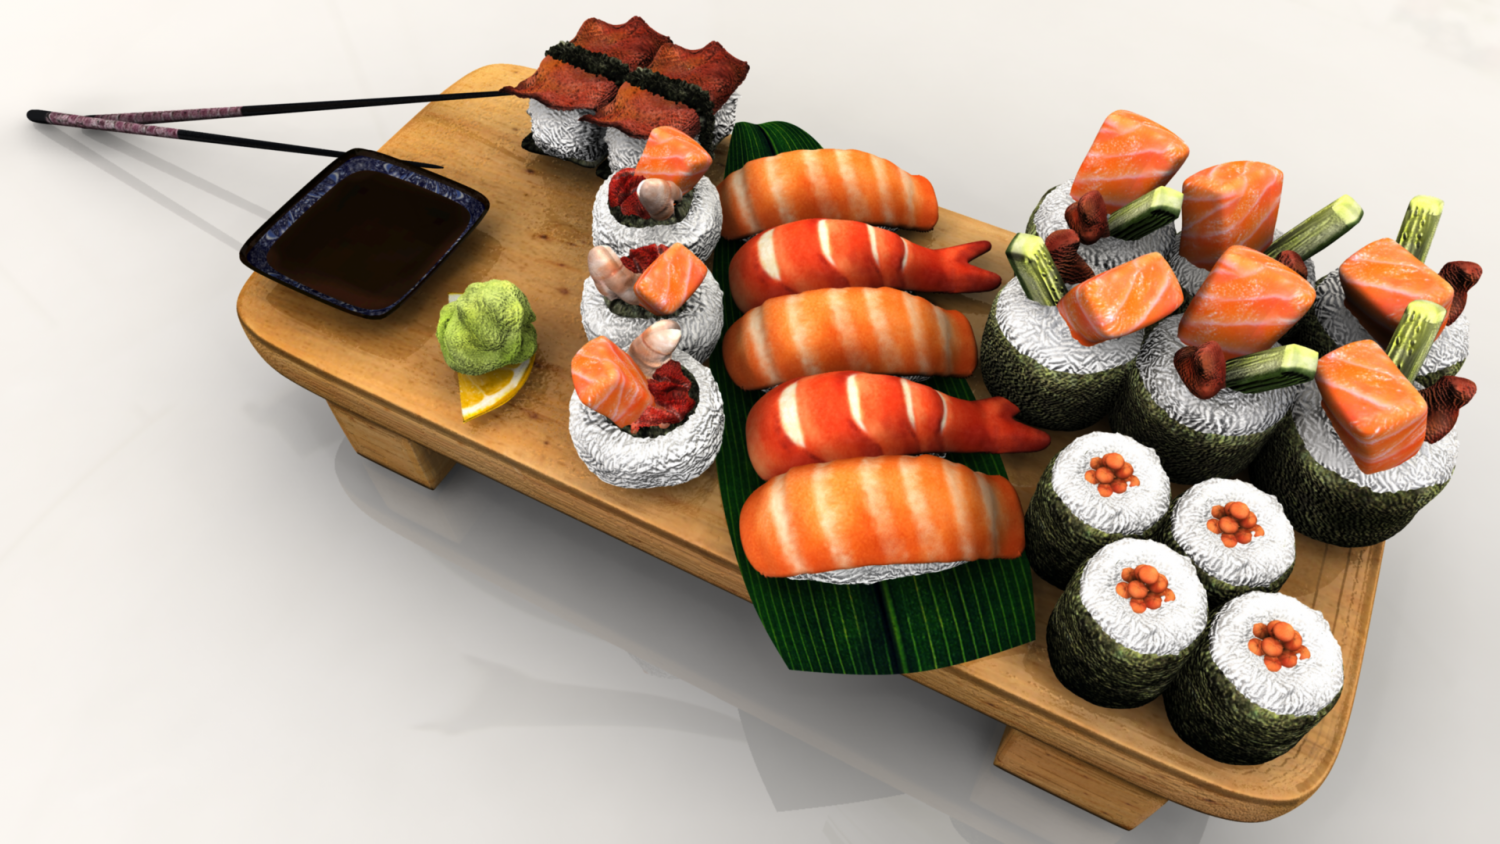 sushi_3d_model_c4d_max_obj_fbx_ma_lwo_3ds_3dm_stl_1174790_o.png